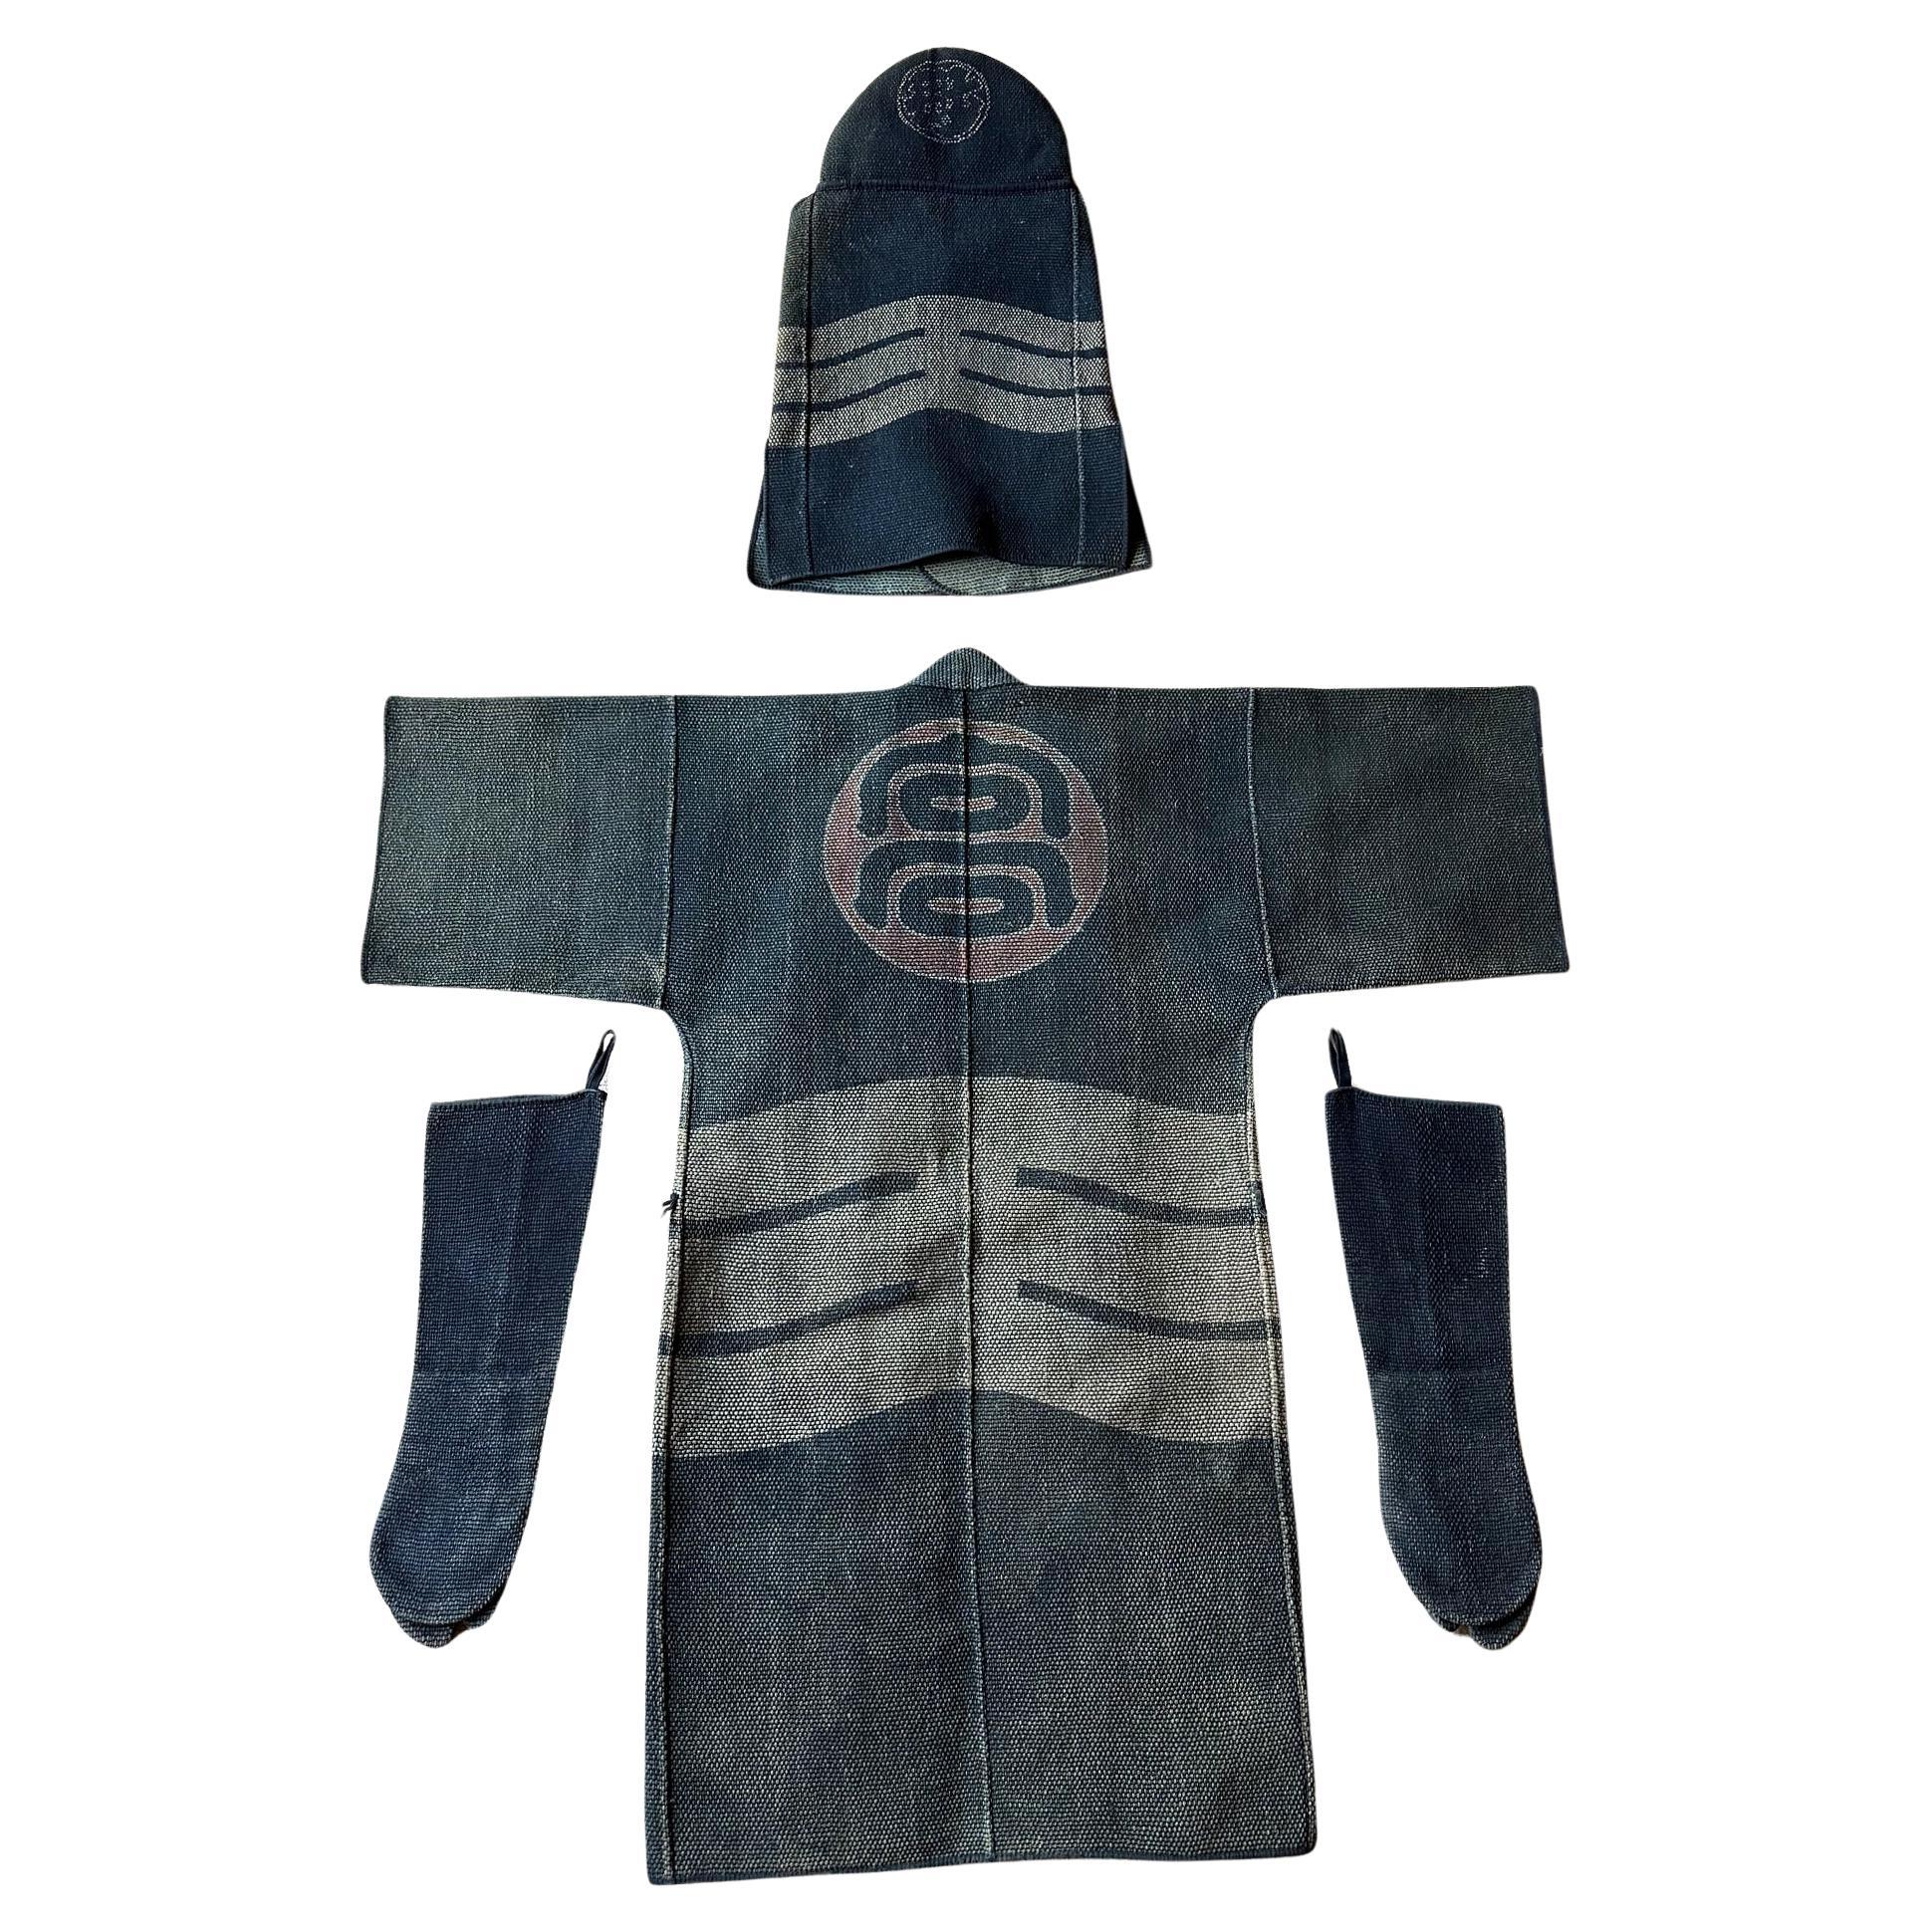 A rare four-piece Japanese Fireman's assemble (Shobosho uniform) woven with heavy cotton and decorated with stencil resist dye circa 1890-20s Late Meiji to Showa Period. The assemble consists of a long jacket (Hikeshi-Haten), a heavy-padded hooded